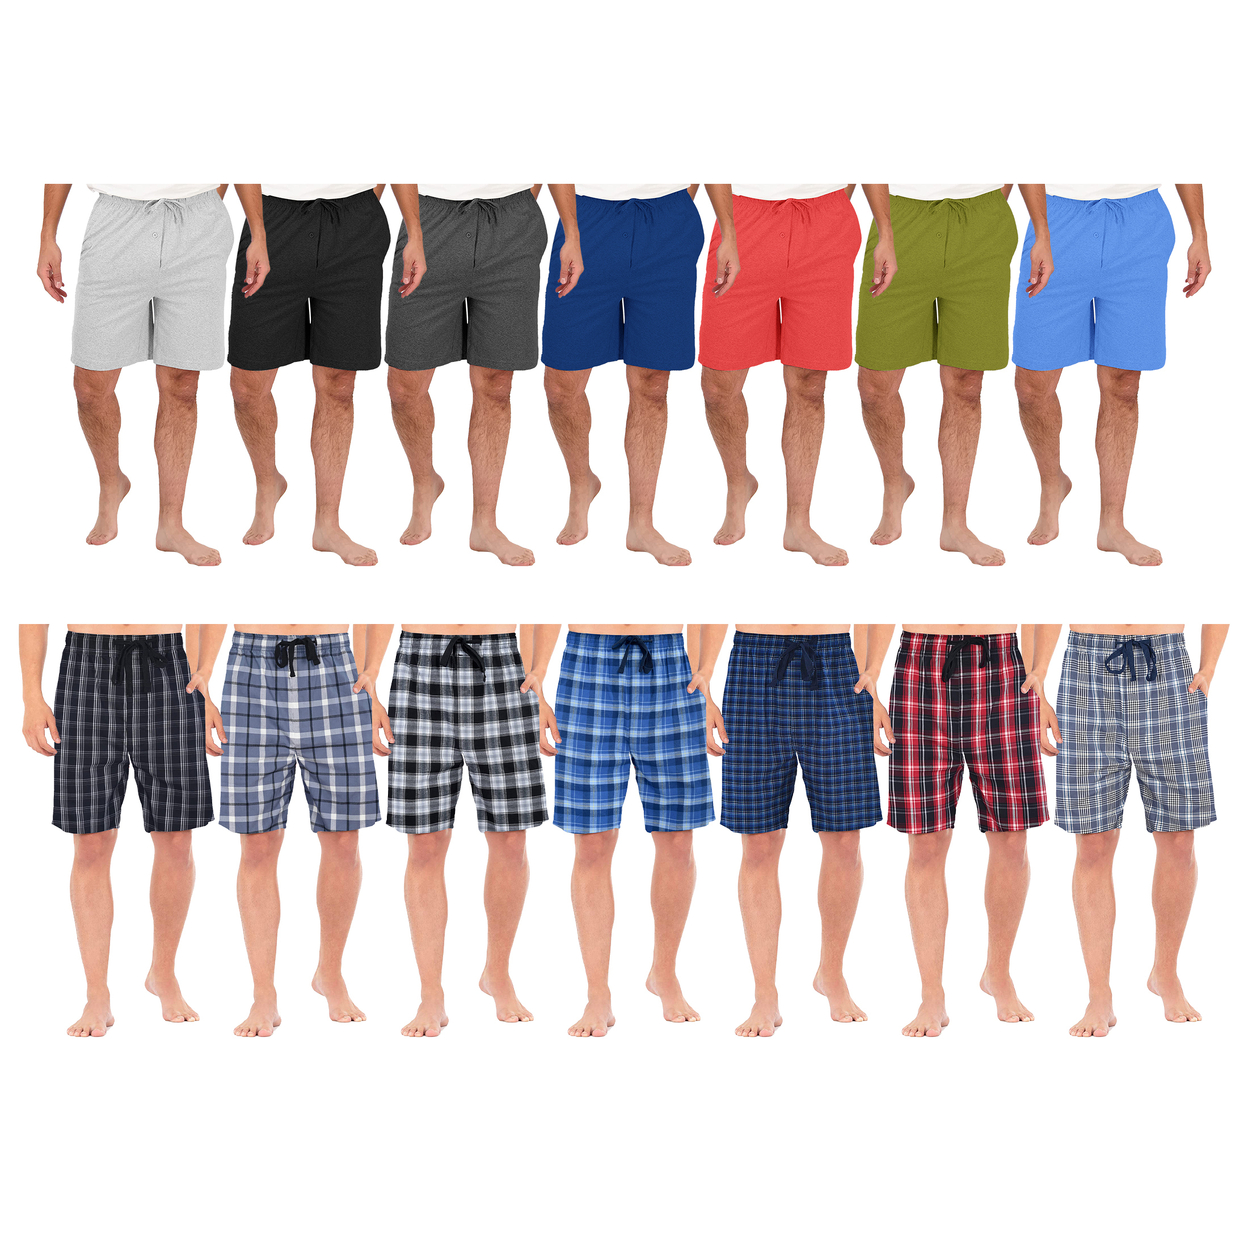 2-Pack: Men's Ultra Soft Knit Lounge Pajama Sleep Shorts - Solid, Small